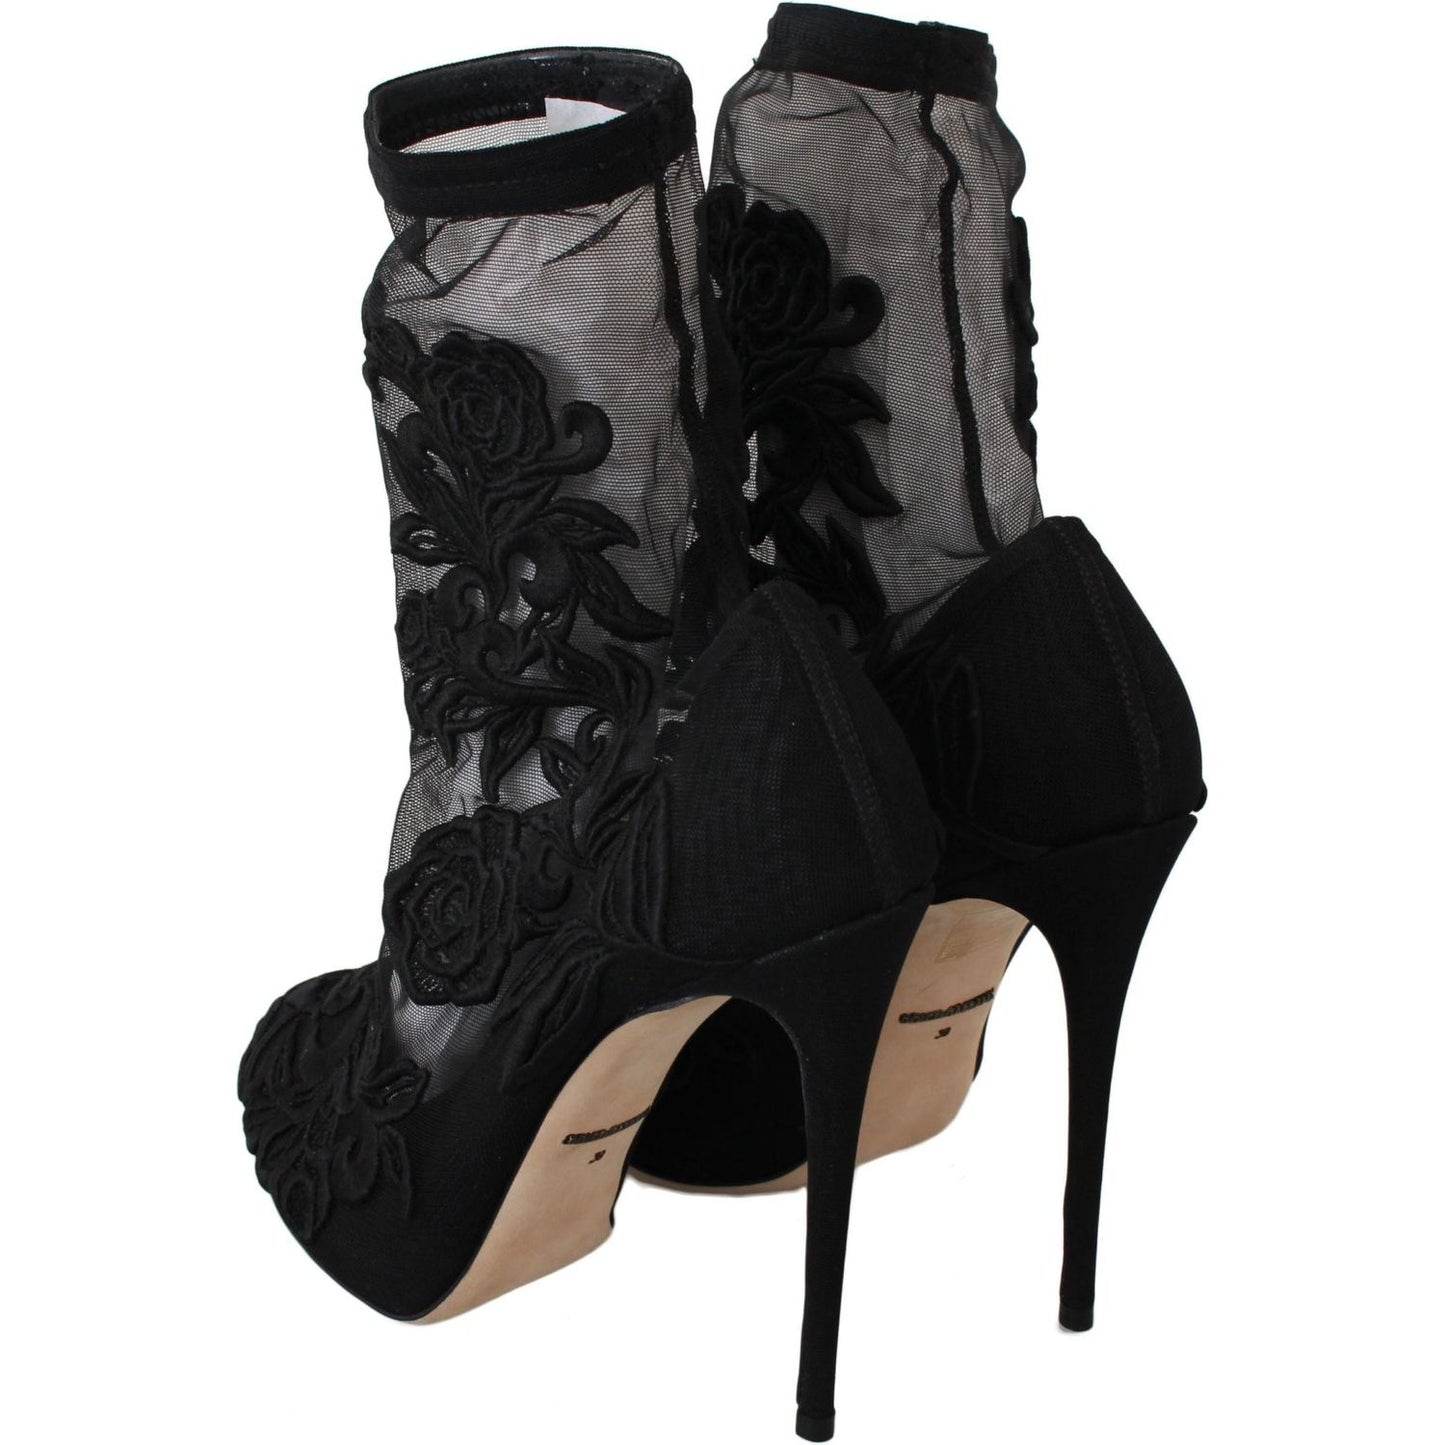 Dolce & Gabbana Embroidered Floral Stiletto Socks Booties Shoes black-roses-stilettos-booties-socks-shoes